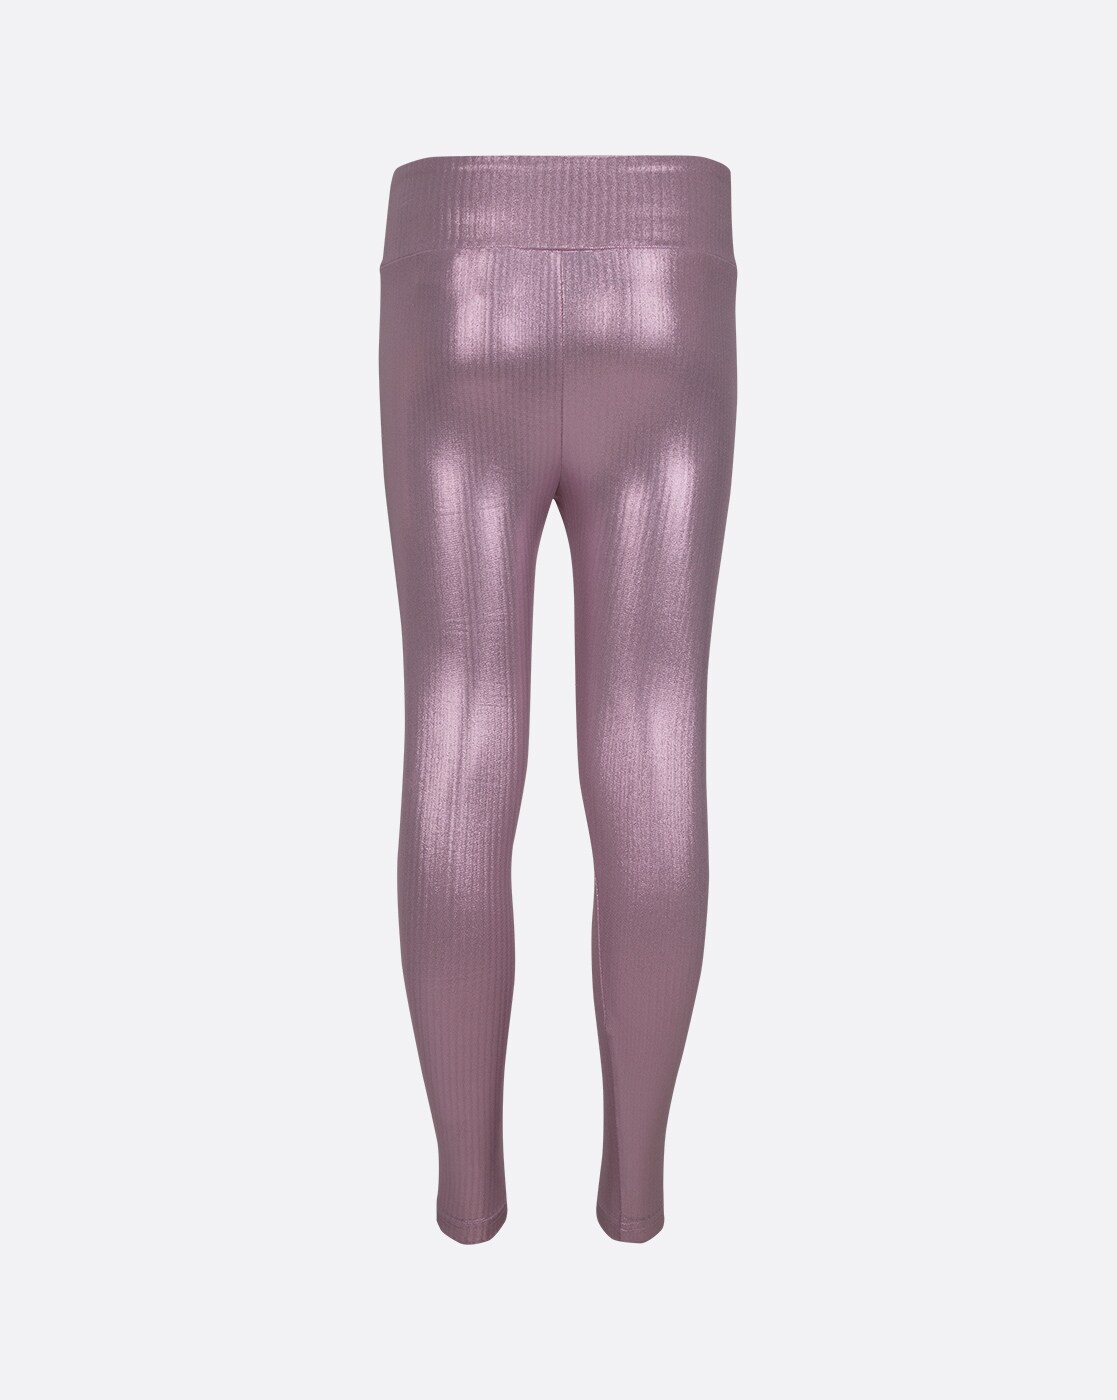 Metallic Leggings Shiny High-Waisted for Women Holiday Christmas Silver  Trousers Stretchy Streetwear ouc1187 - AliExpress